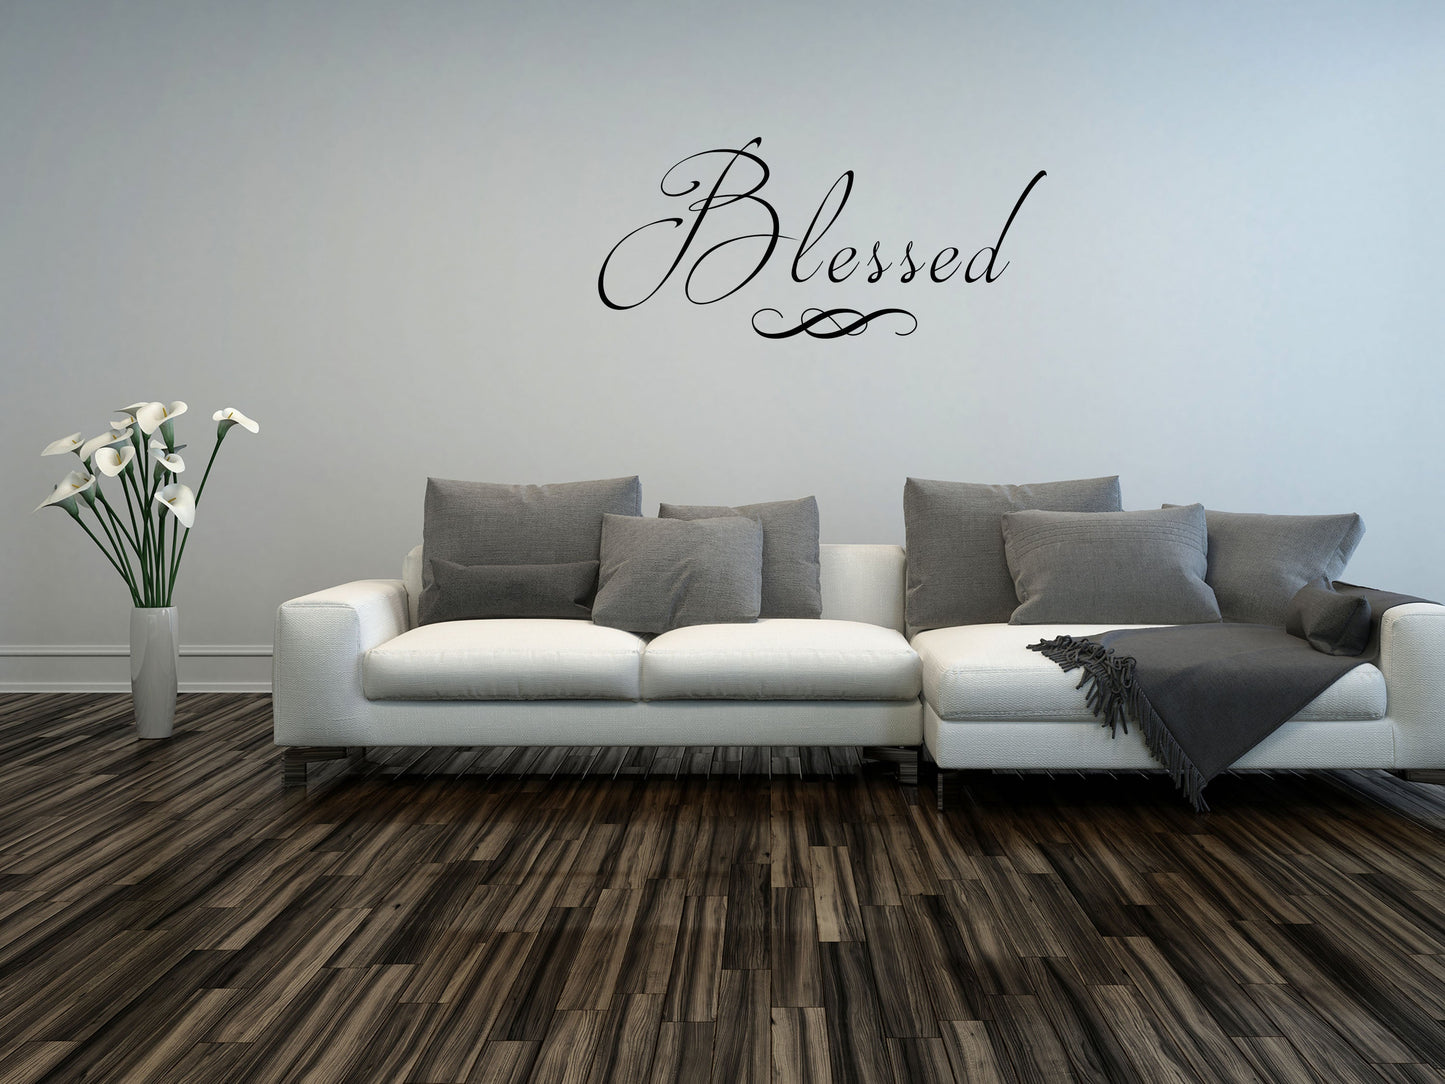 Blessed Bible Wall Bedroom Sticker Vinyl Wall Decal Inspirational Wall Signs 